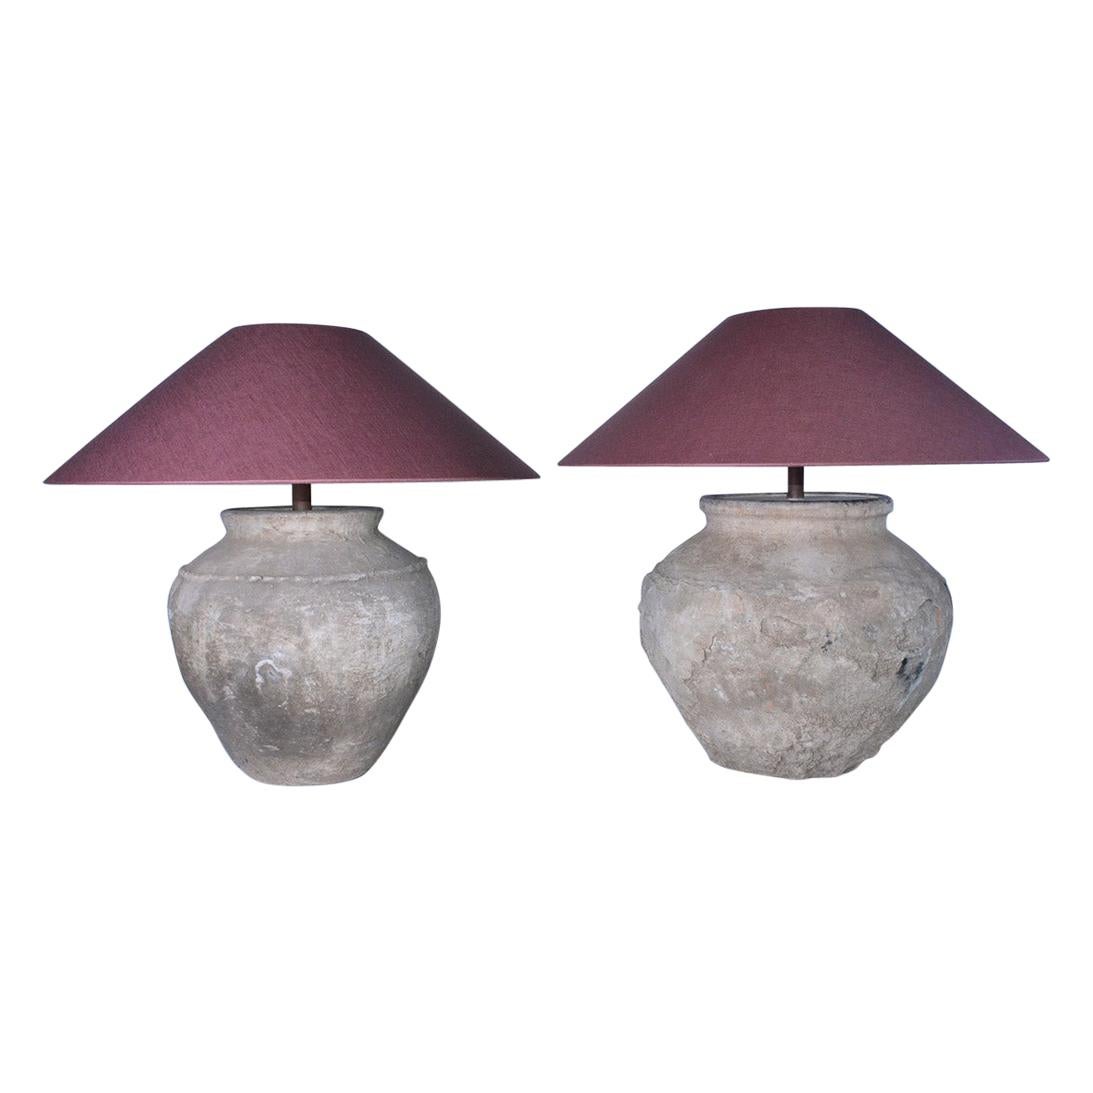 Large Antique Terracotta Jar Lamps with Shades, Sold Singly